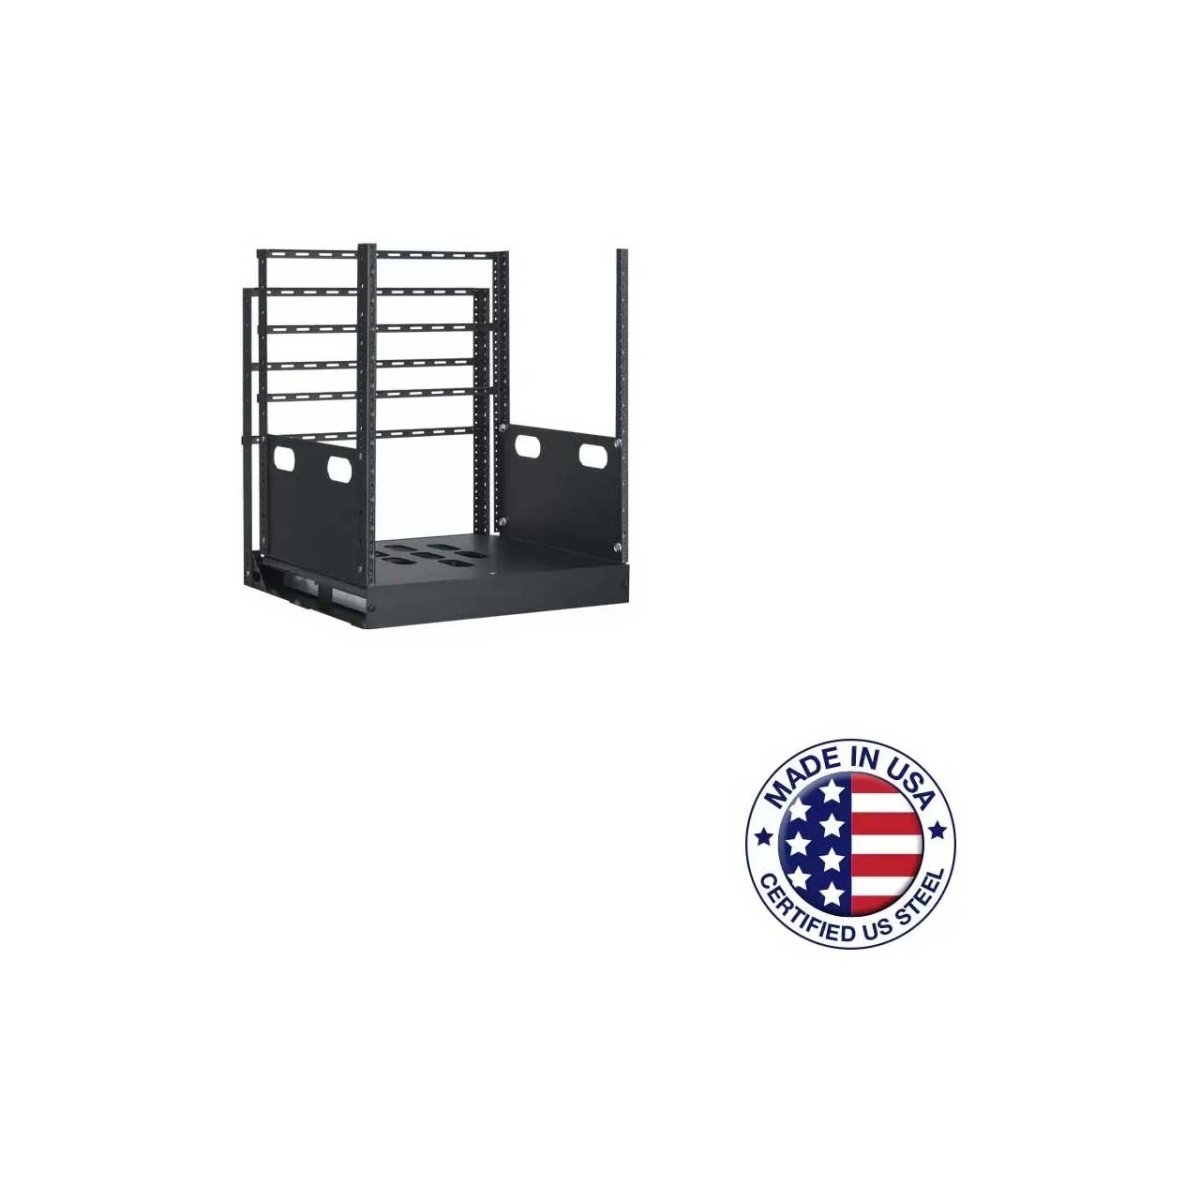 Picture of Lowell Manufacturing LMC-LPTR4-1223 LPTR4-1223 12RU Pull & Turn Millwork Rack with Four Support Rails - 23 in. Deep